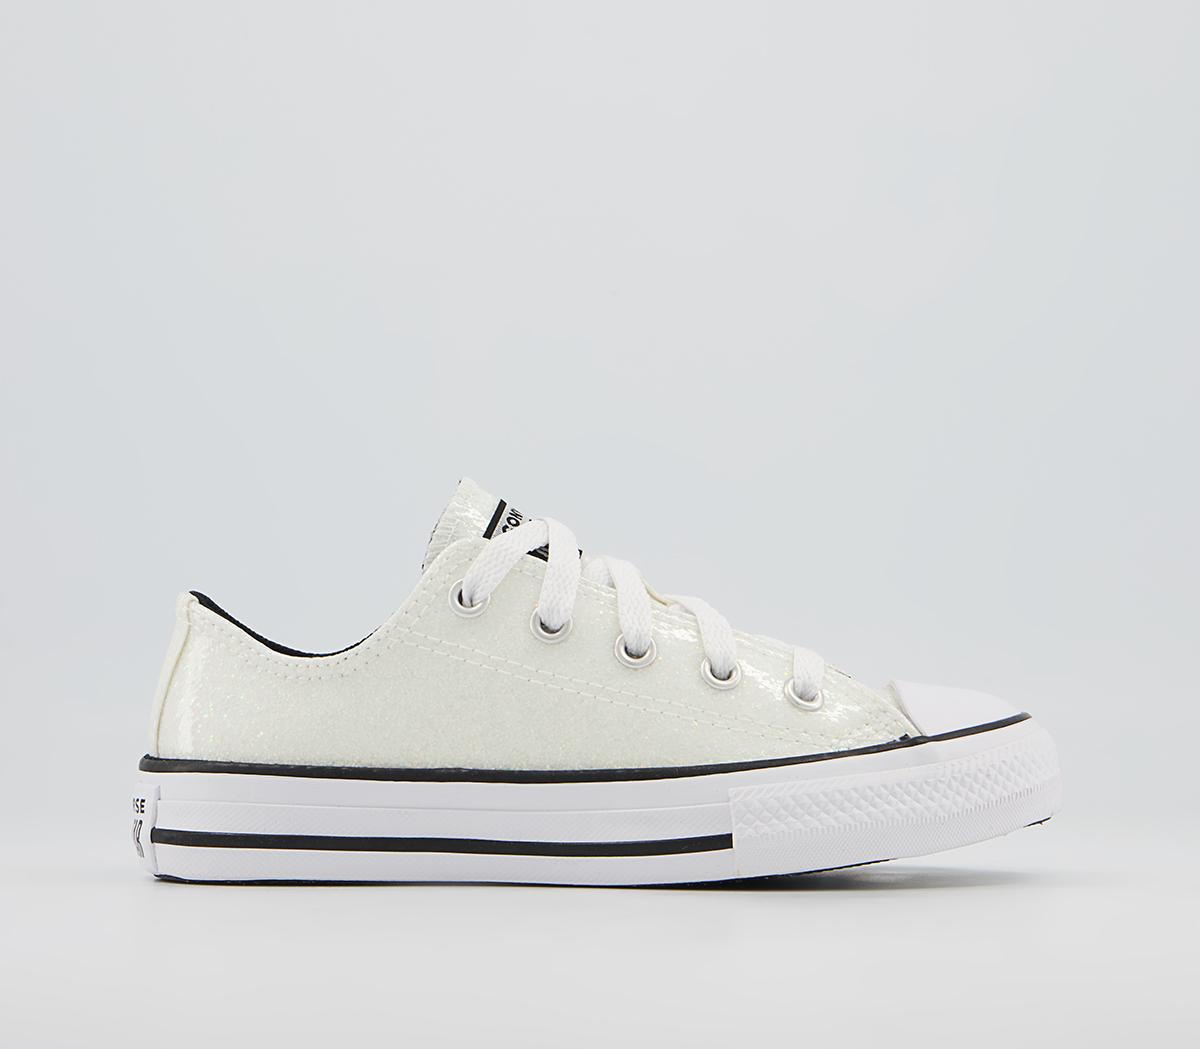 ConverseAll Star Low Youth TrainersSilver Black White Glitter